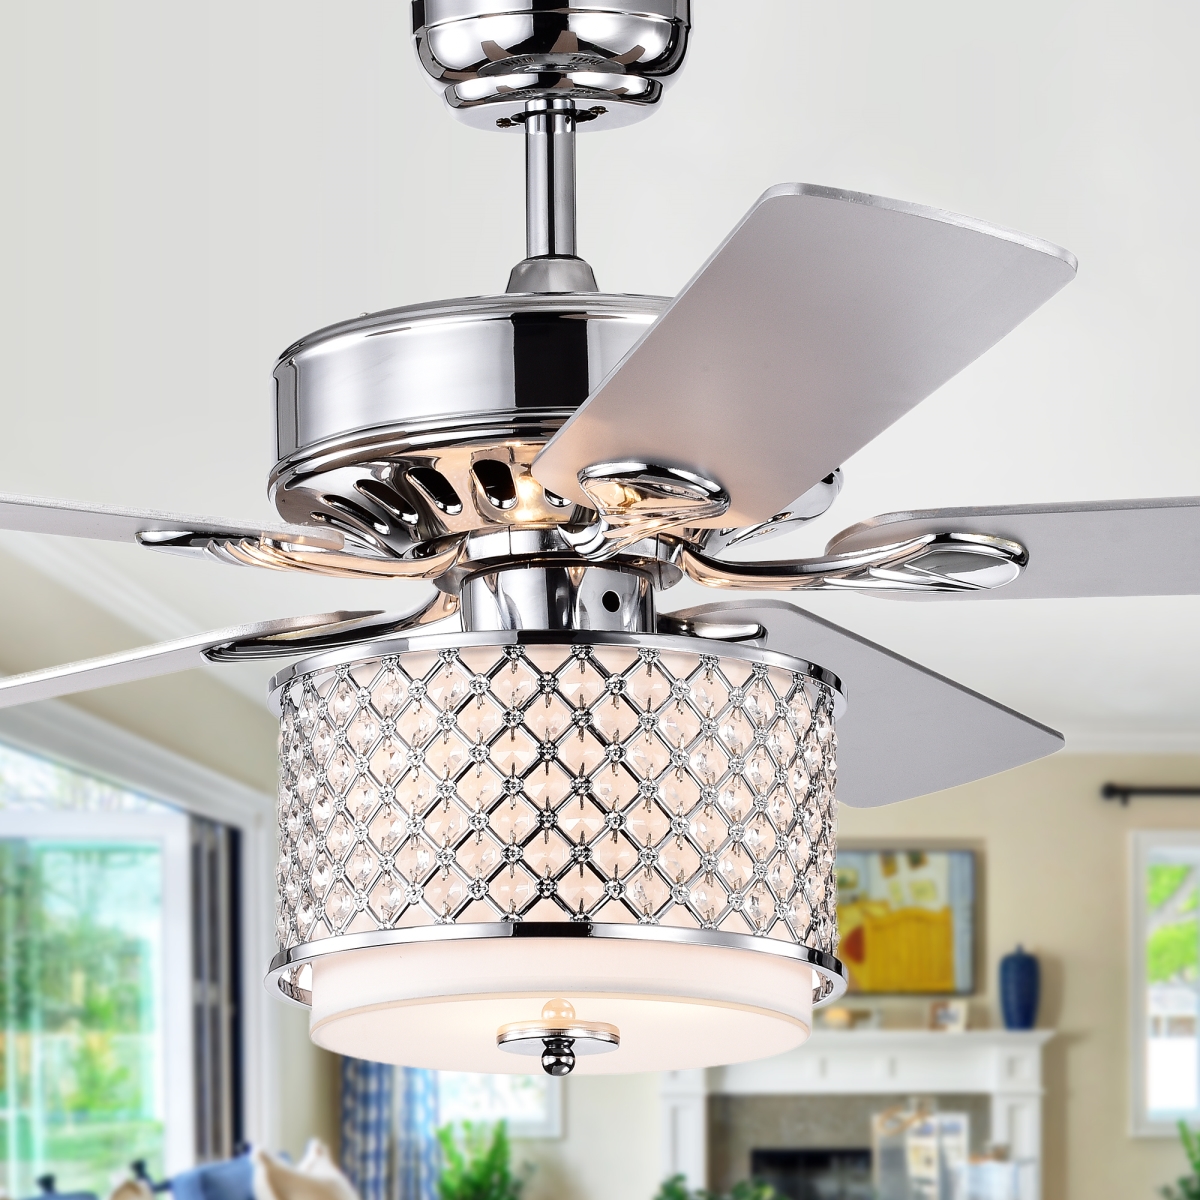 Cfl-8418remo-ch 52 In. Shelee 5-blade Lighted Ceiling Fan With Glass Shade, Chrome